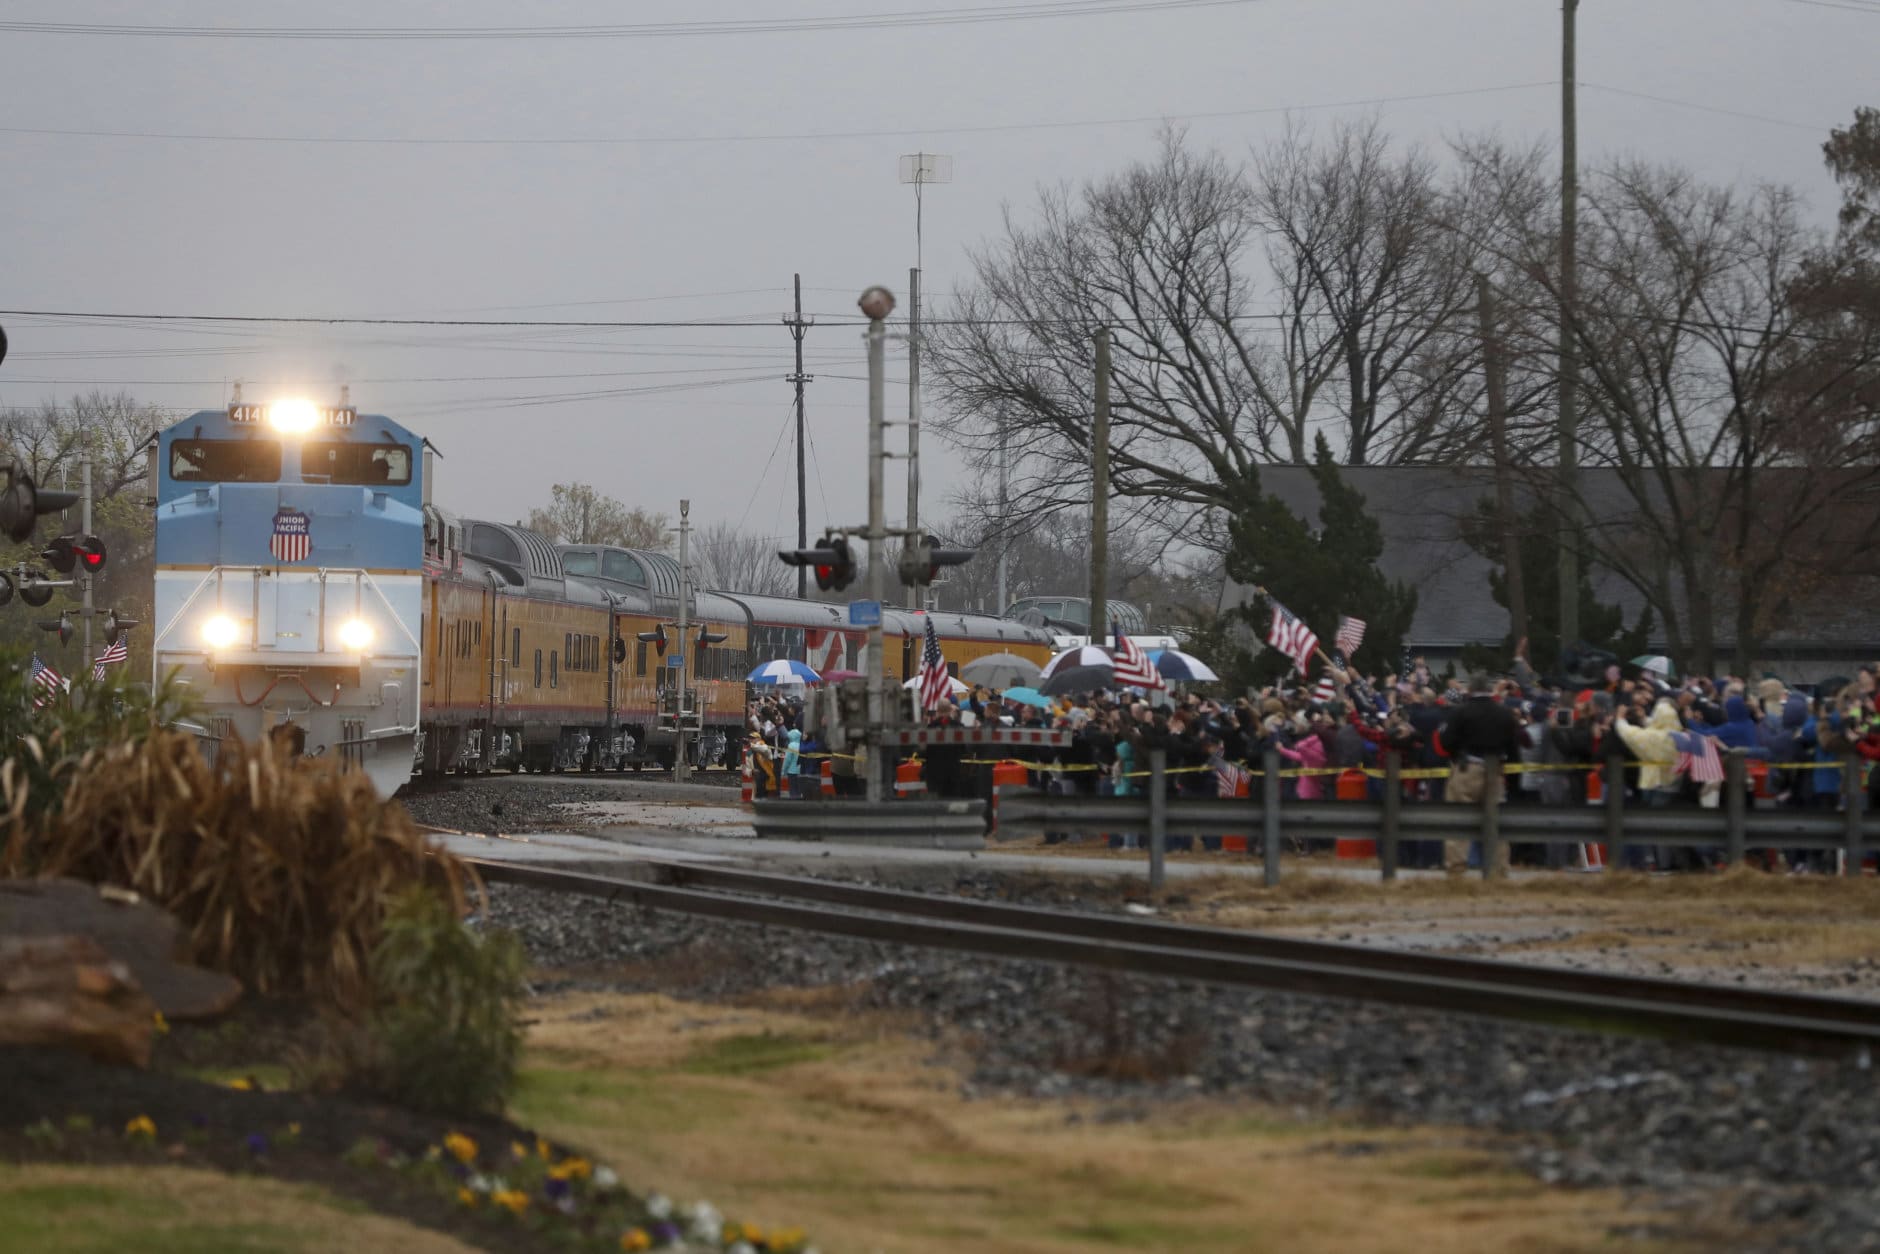 People pay their respects as the train carrying the casket of former President George H.W. Bush passes through Navasota, Texas Thursday, Dec. 6, 2018. (AP Photo/Gerald Herbert)